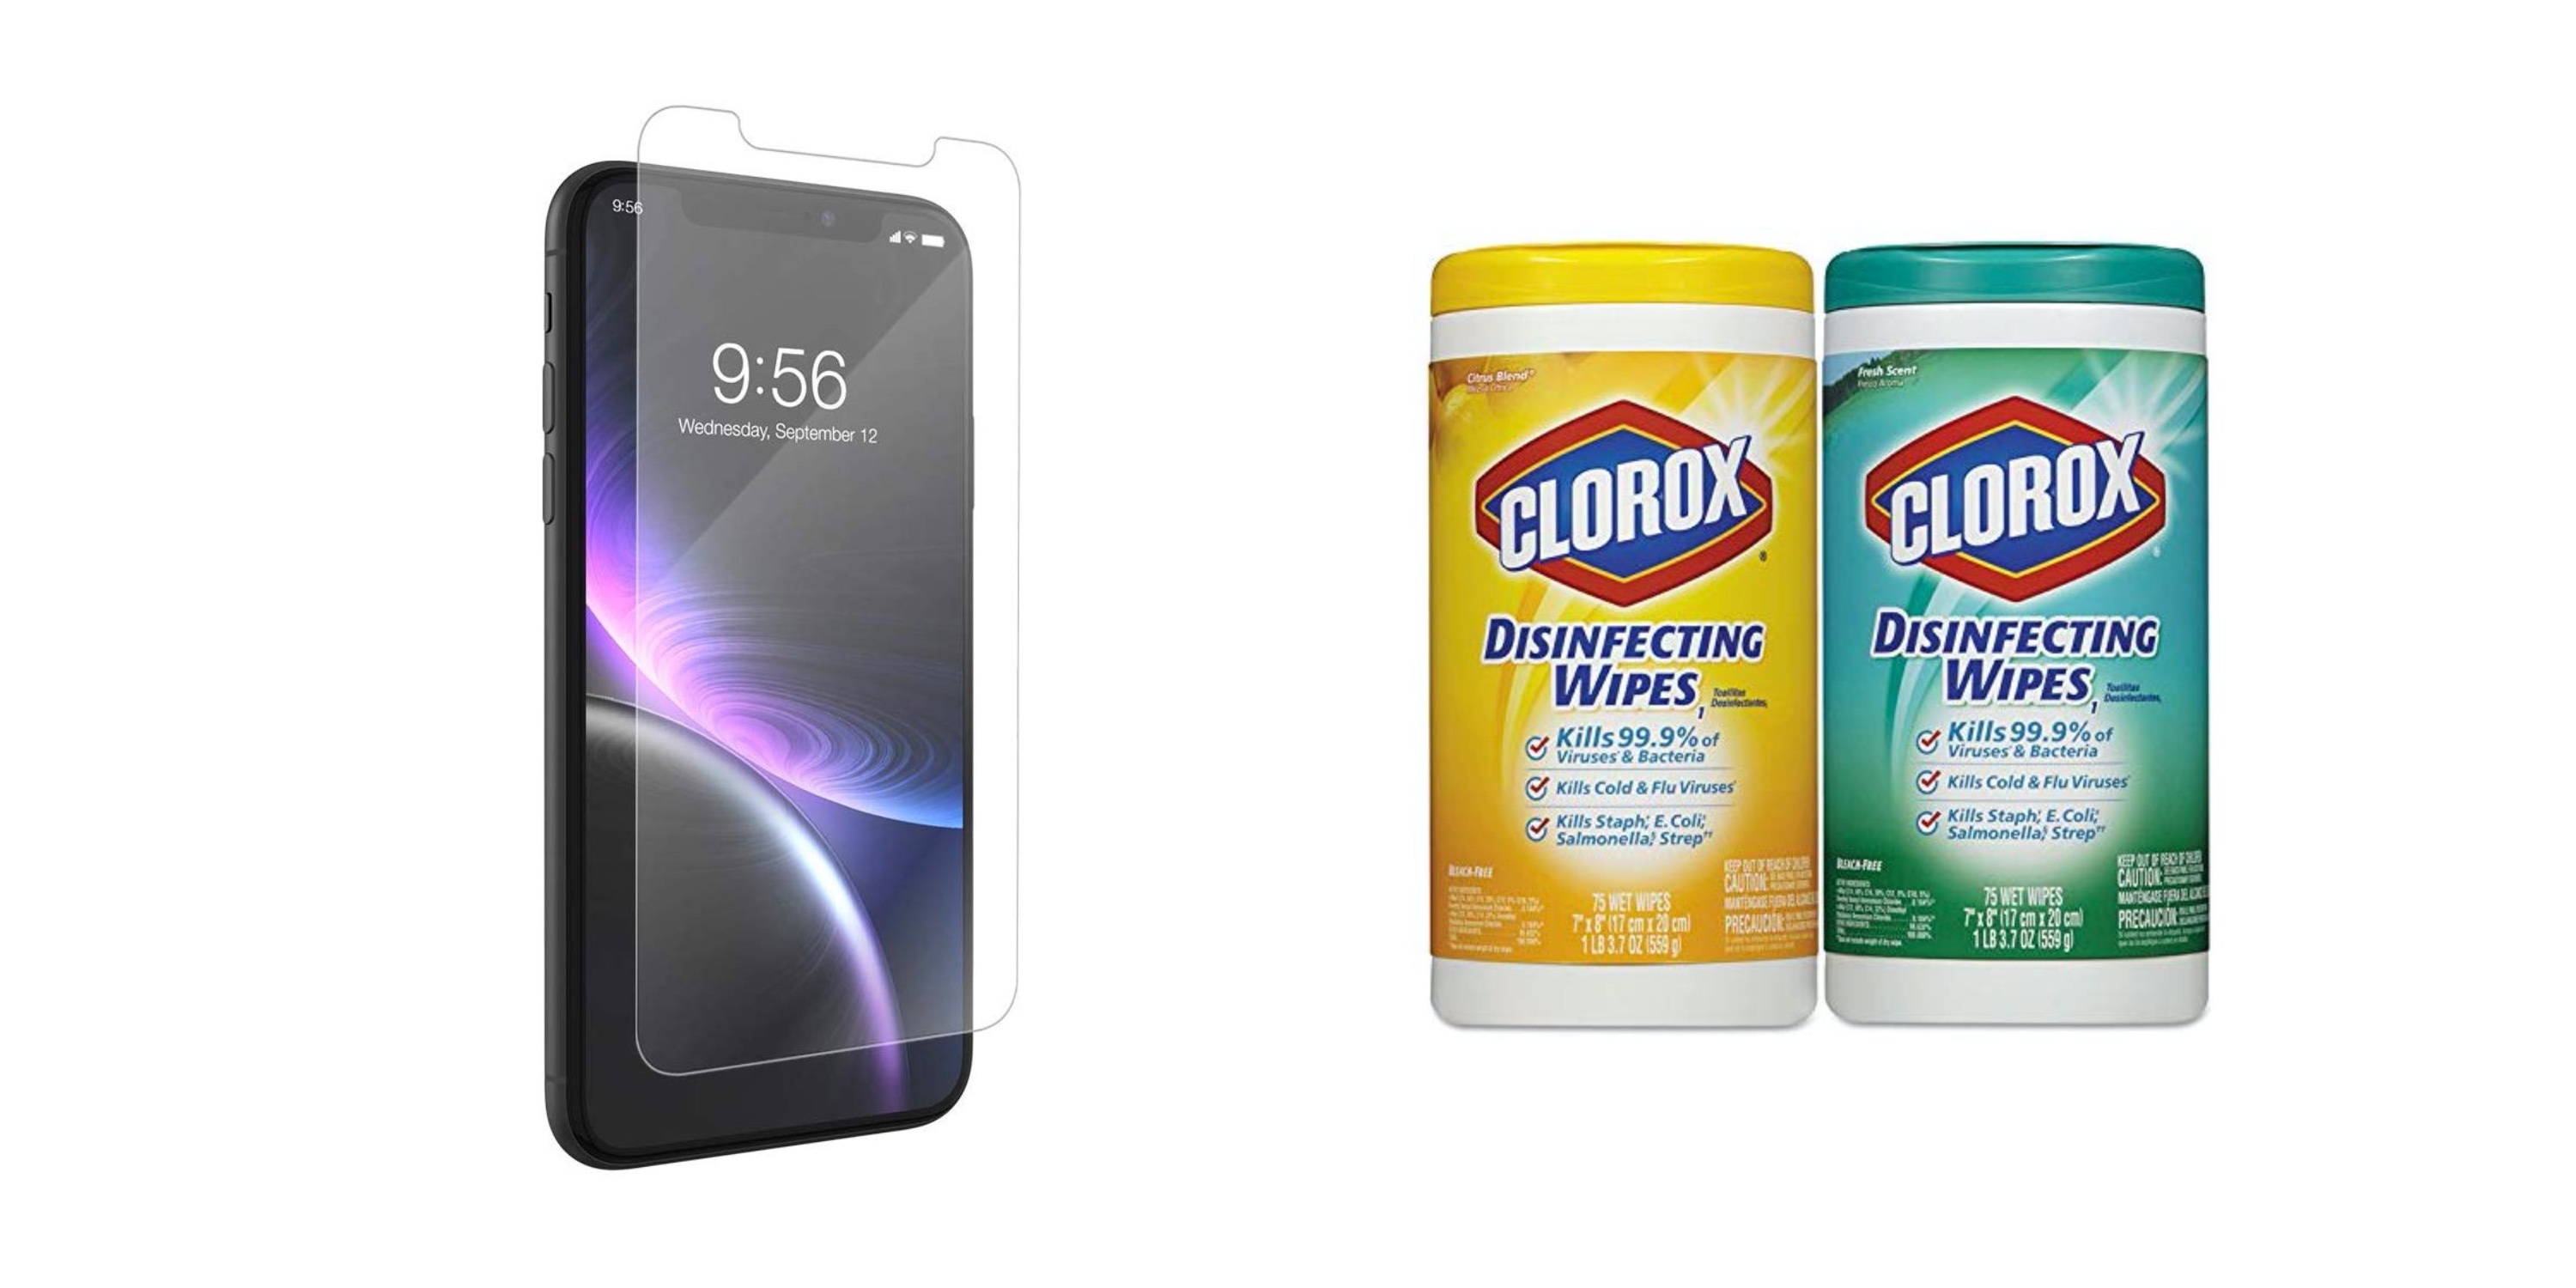 How to clean sanitize iPhone walkthrough